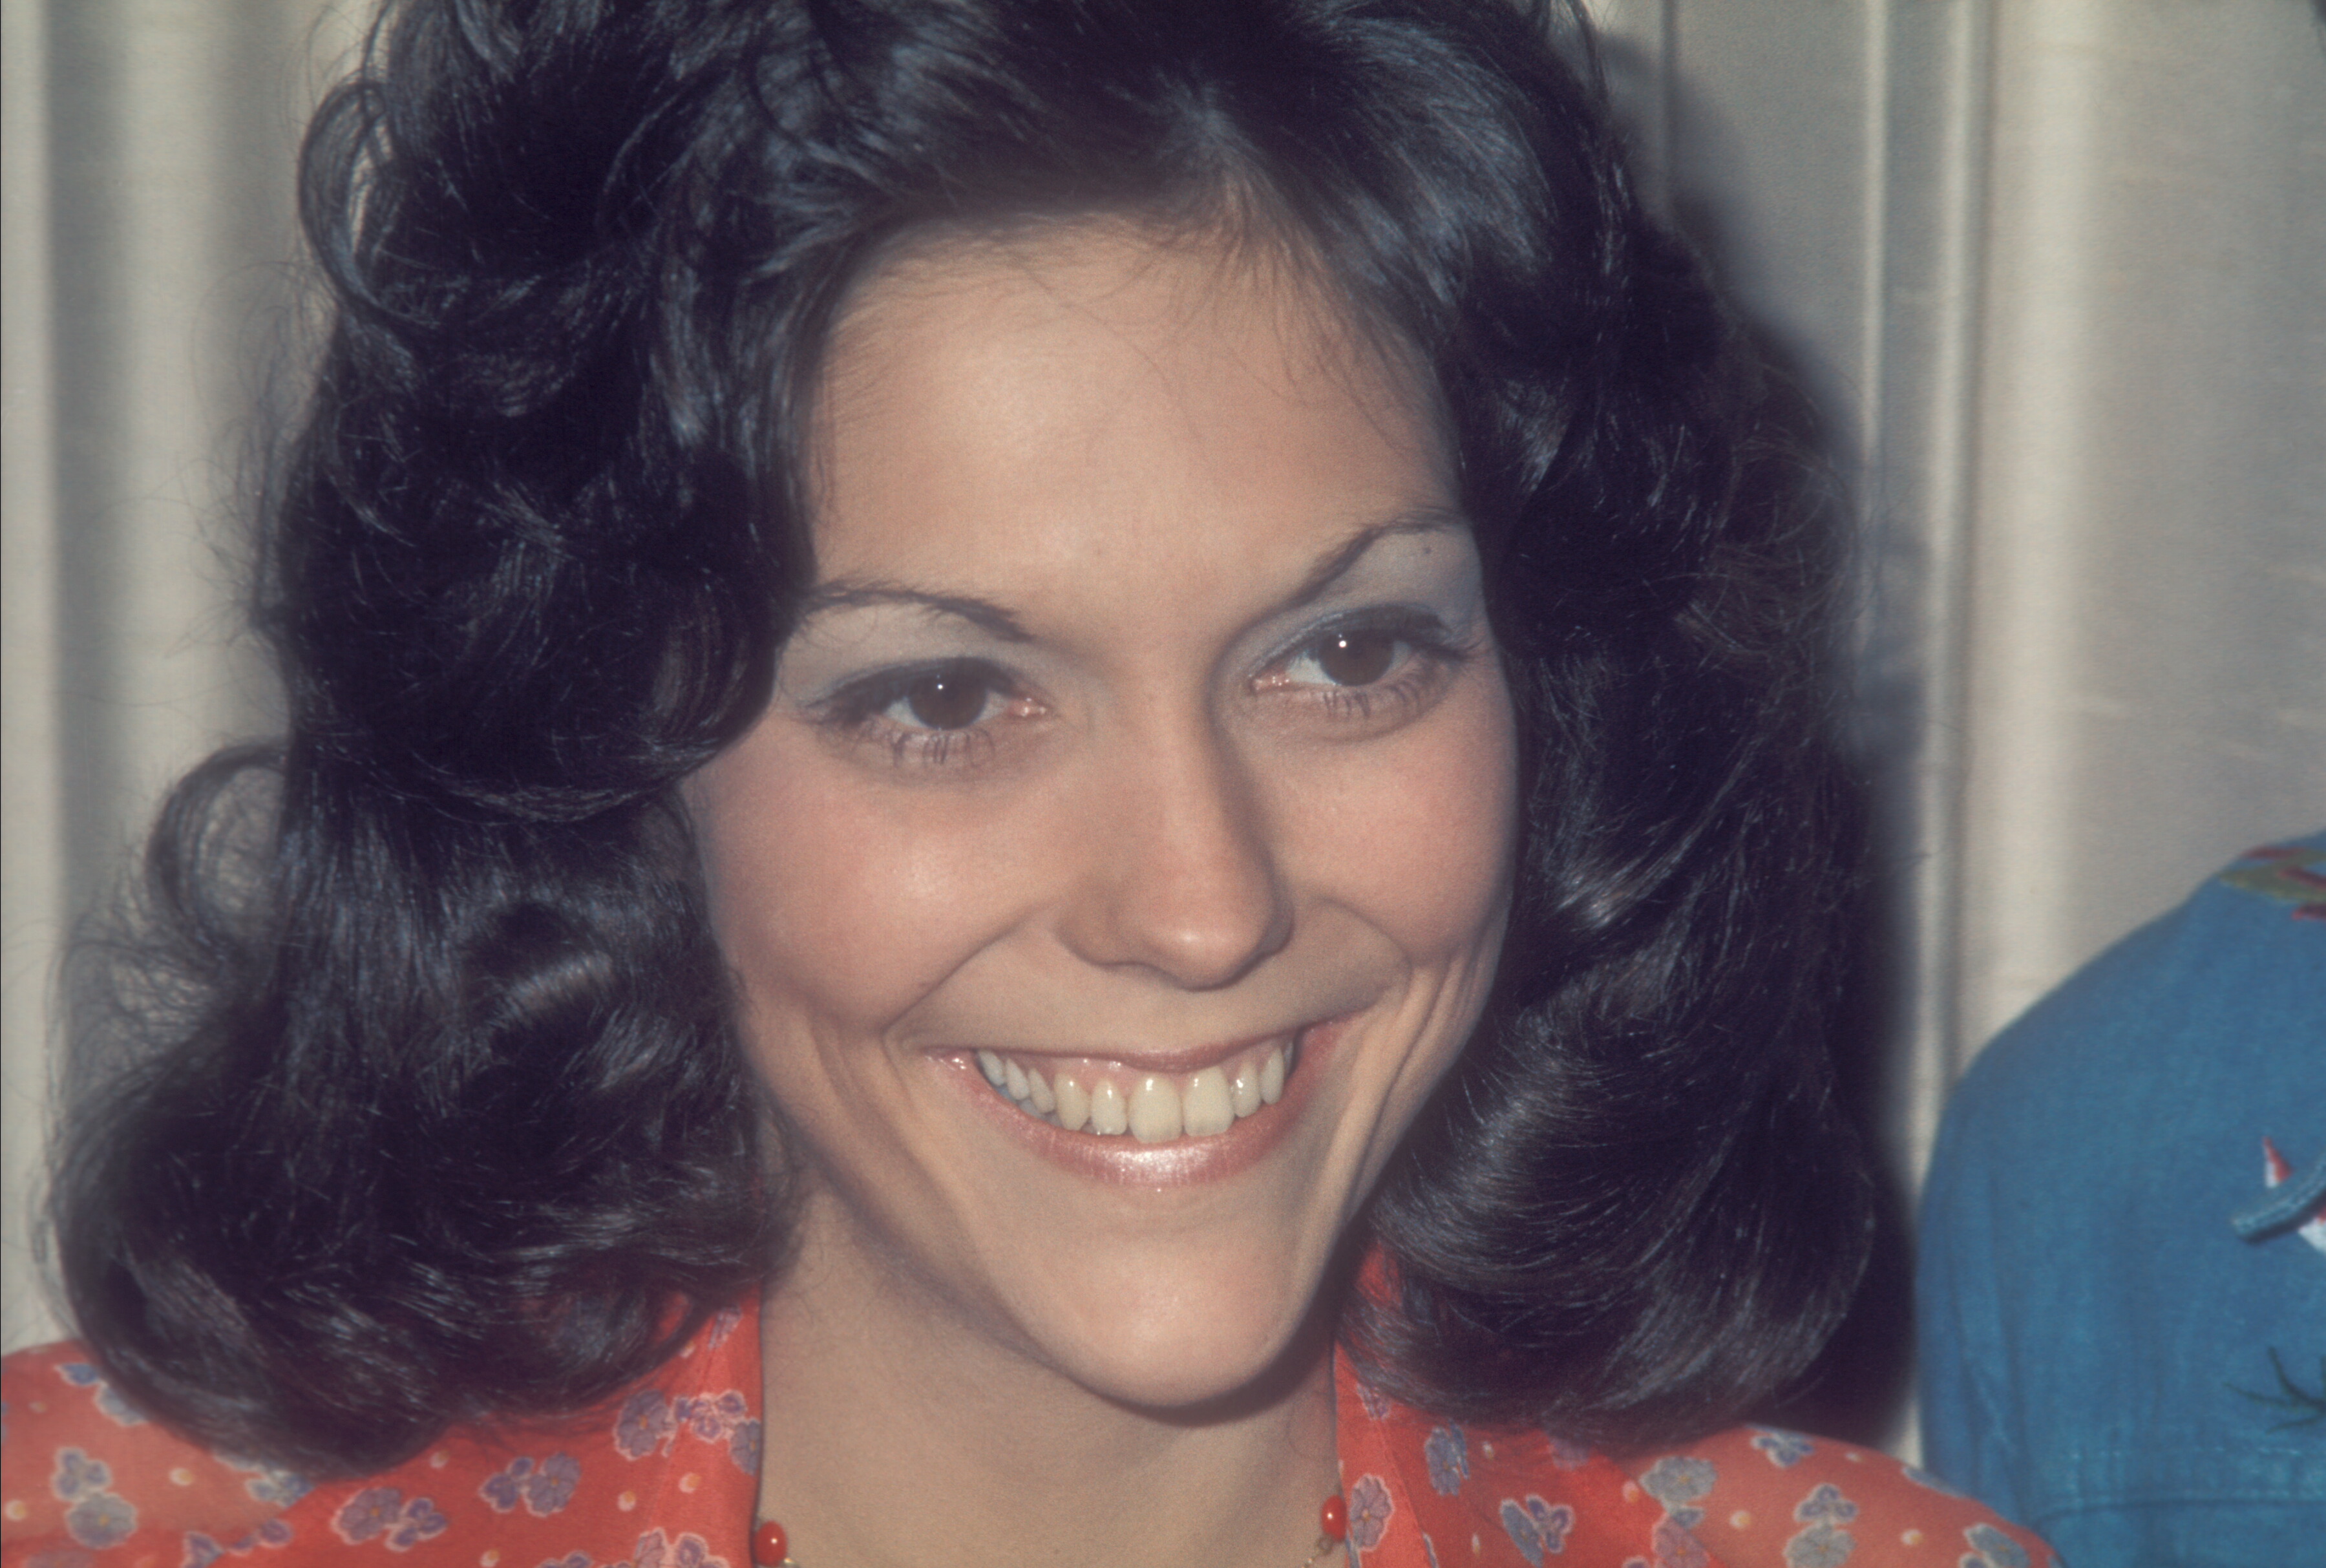 Karen Carpenter at a press conference at In On The Park Hotel in London, 8th February 1974 | Source: Getty Images